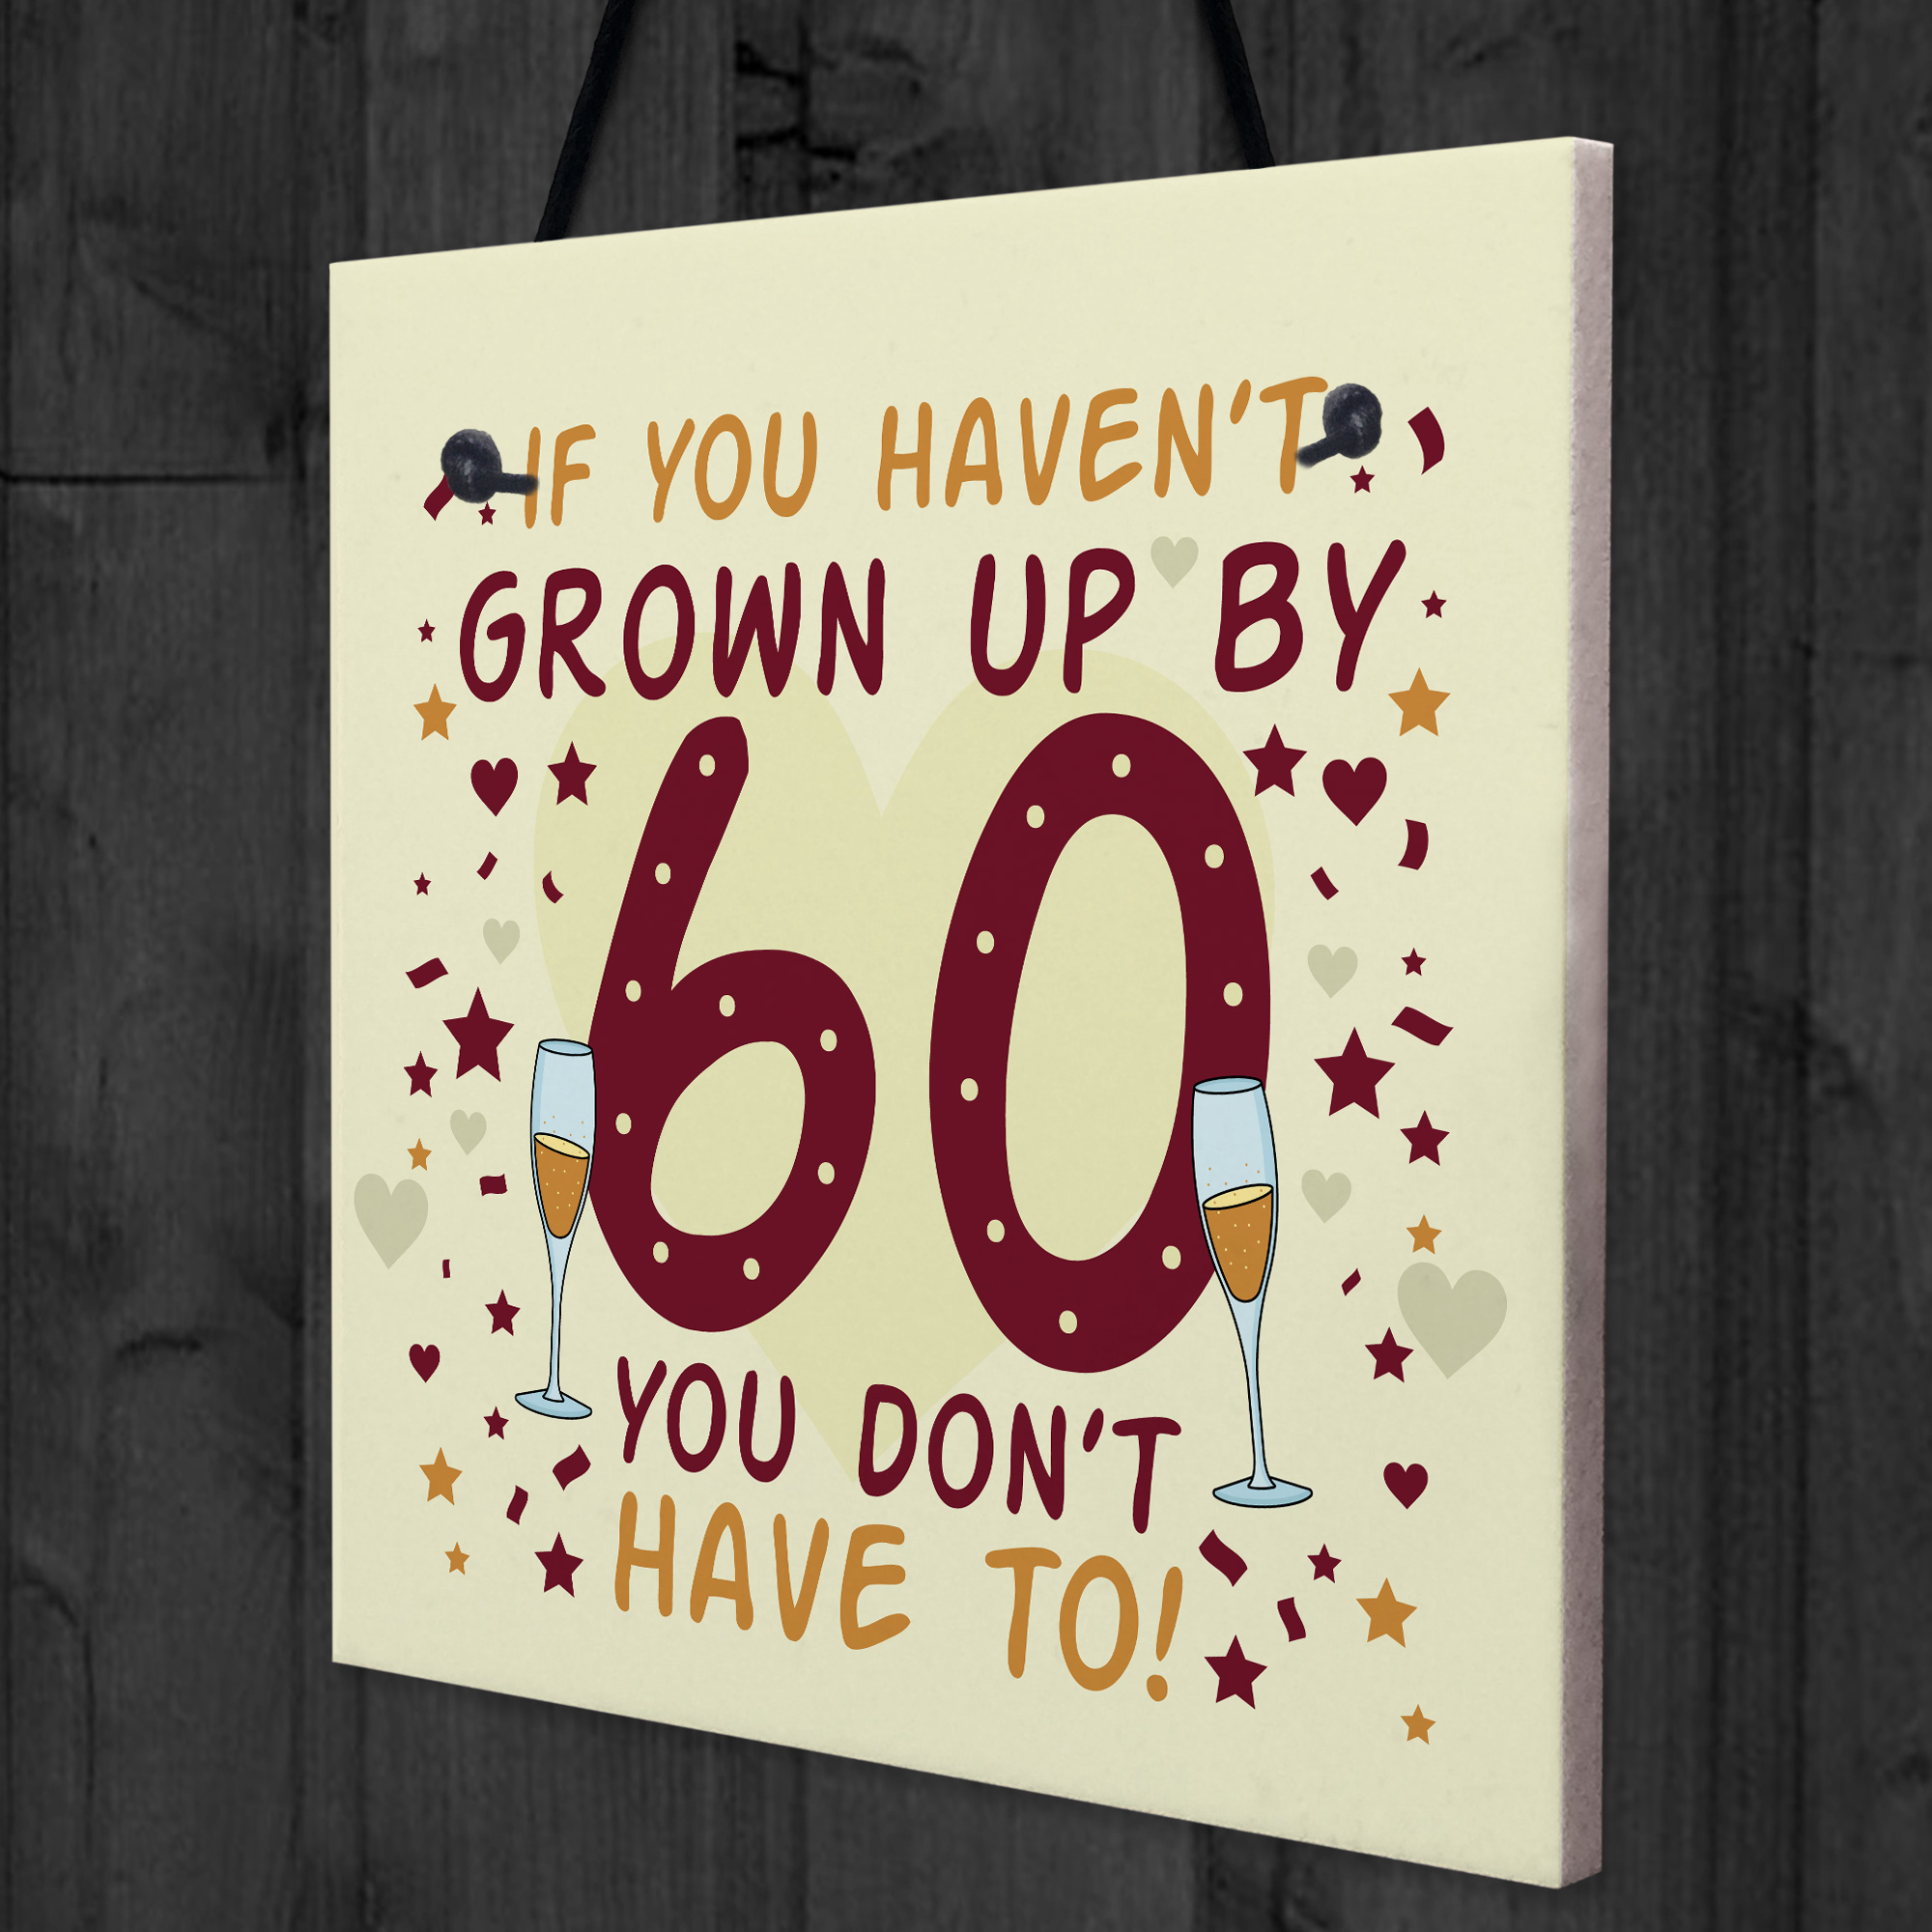 Happy 60th Birthday Images Funny - Printable Template Calendar